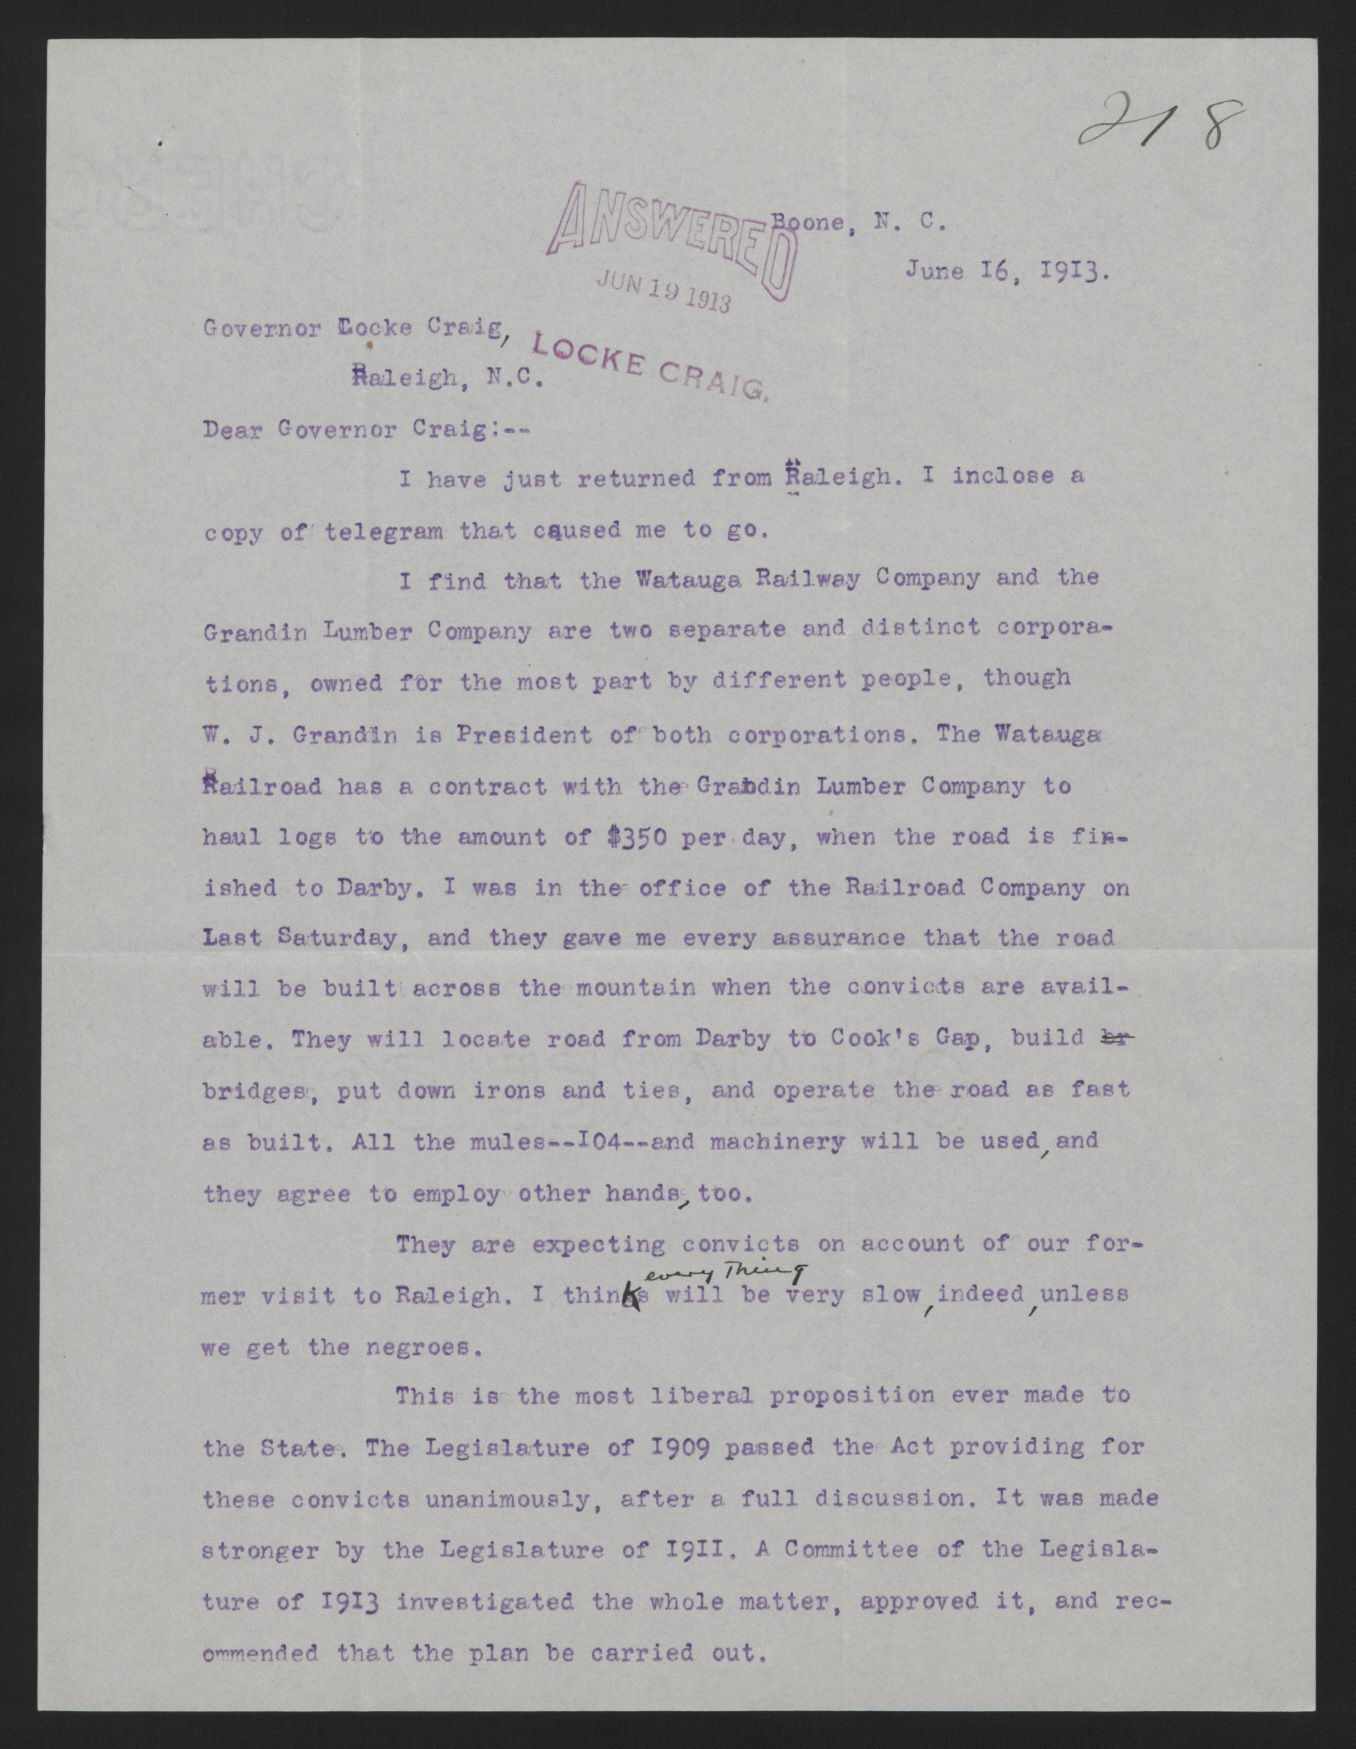 Letter from Dougherty to Craig, June 16, 1913, page 1